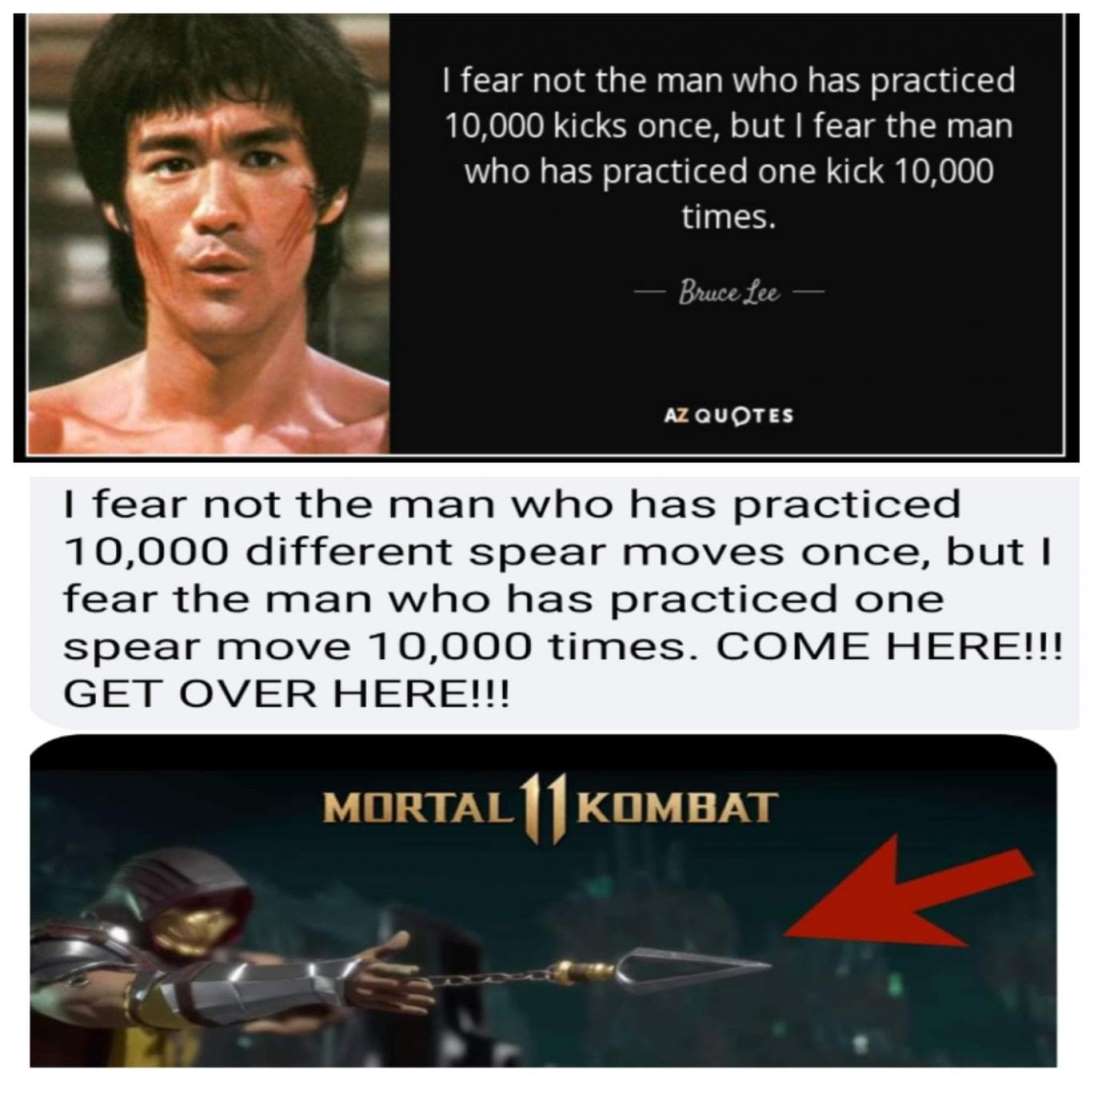 The Most Iconic Phrases and Sayings from Mortal Kombat